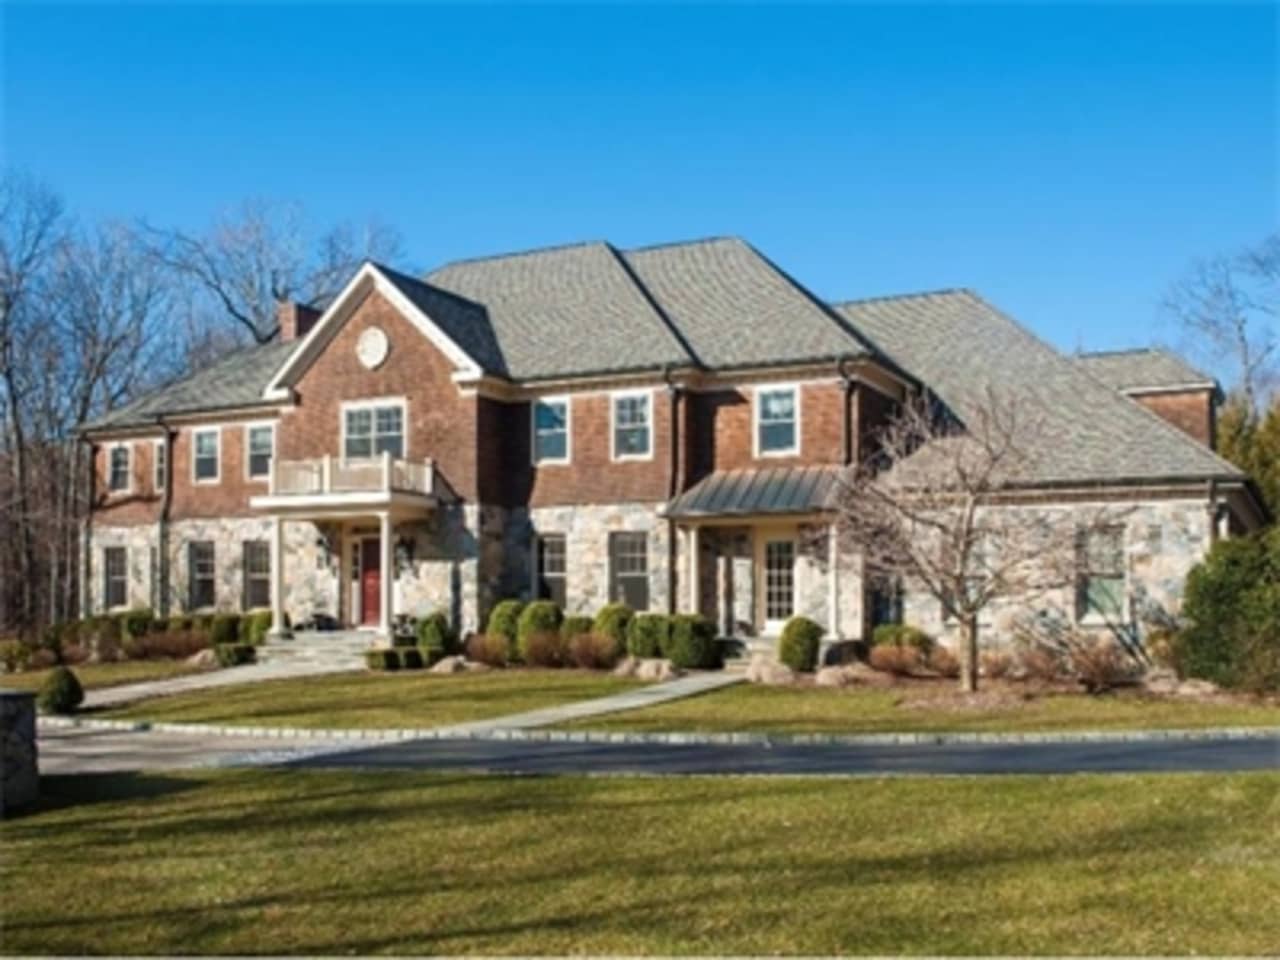 The home at 696 Cheese Spring Road, New Canaan, will be open from 1 to 3 p.m. Sunday. 